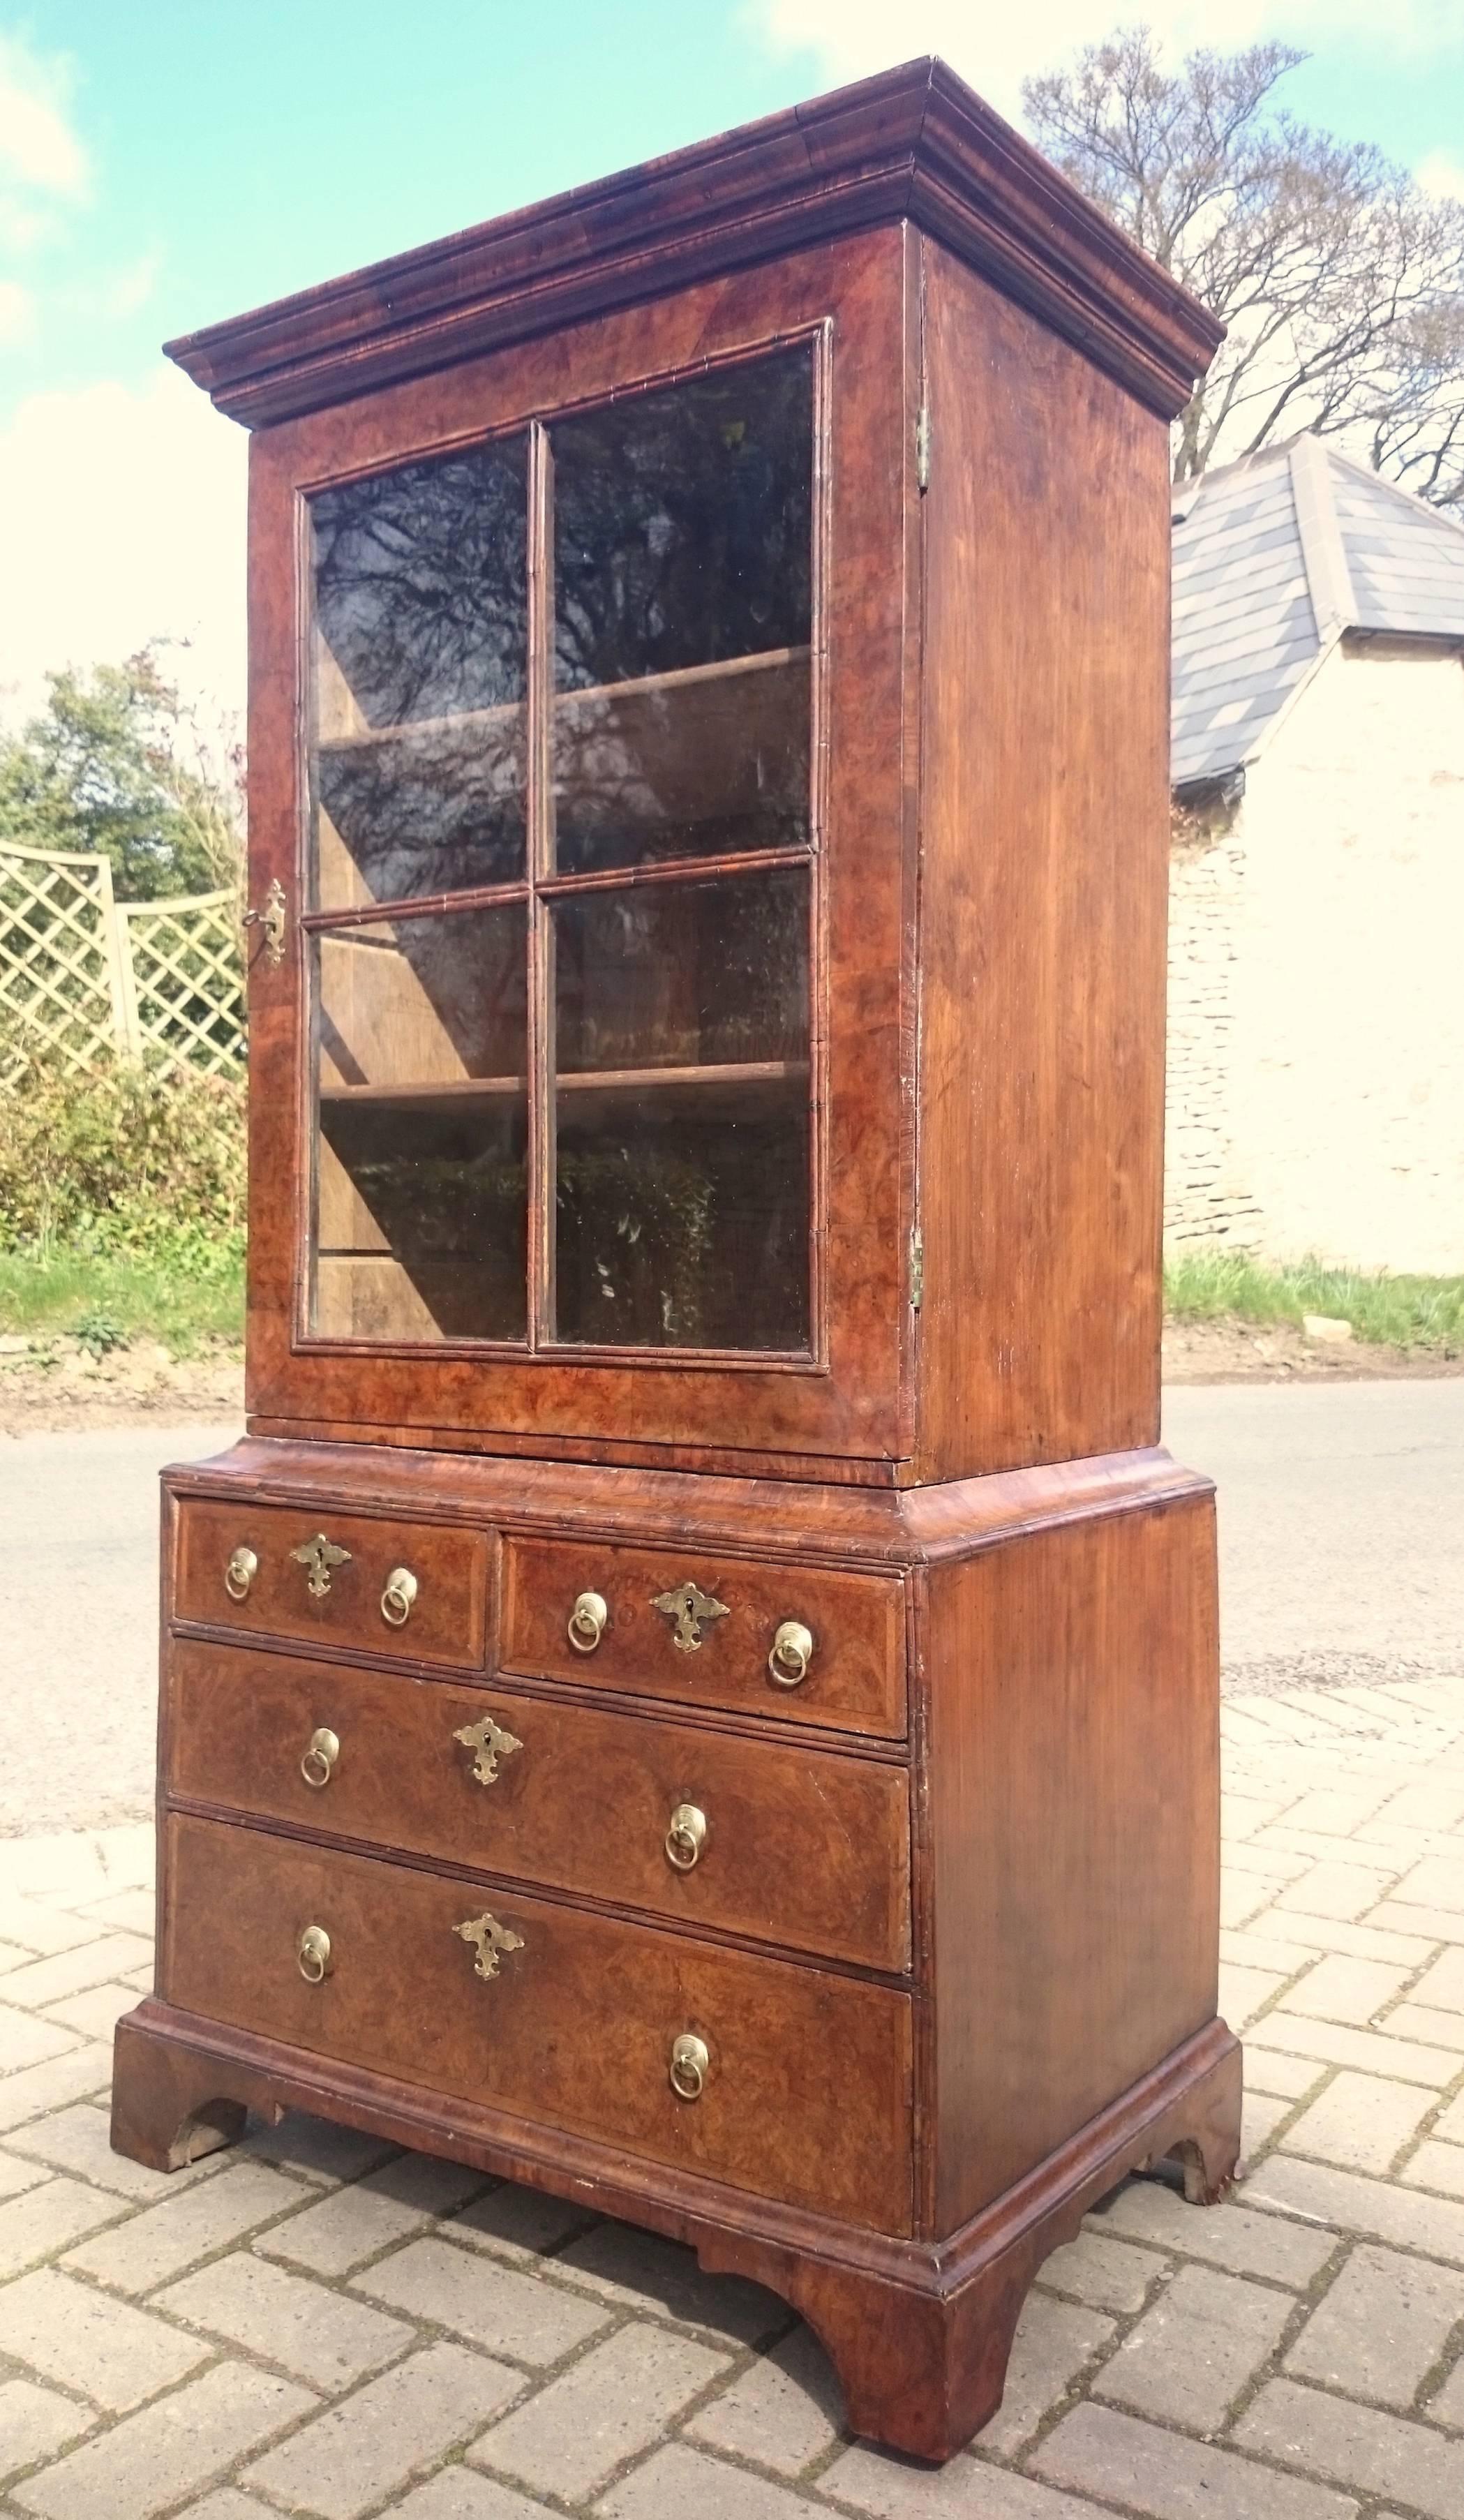 British Early 18th Century Queen Anne Burl Walnut Antique Bookcase Cabinet For Sale